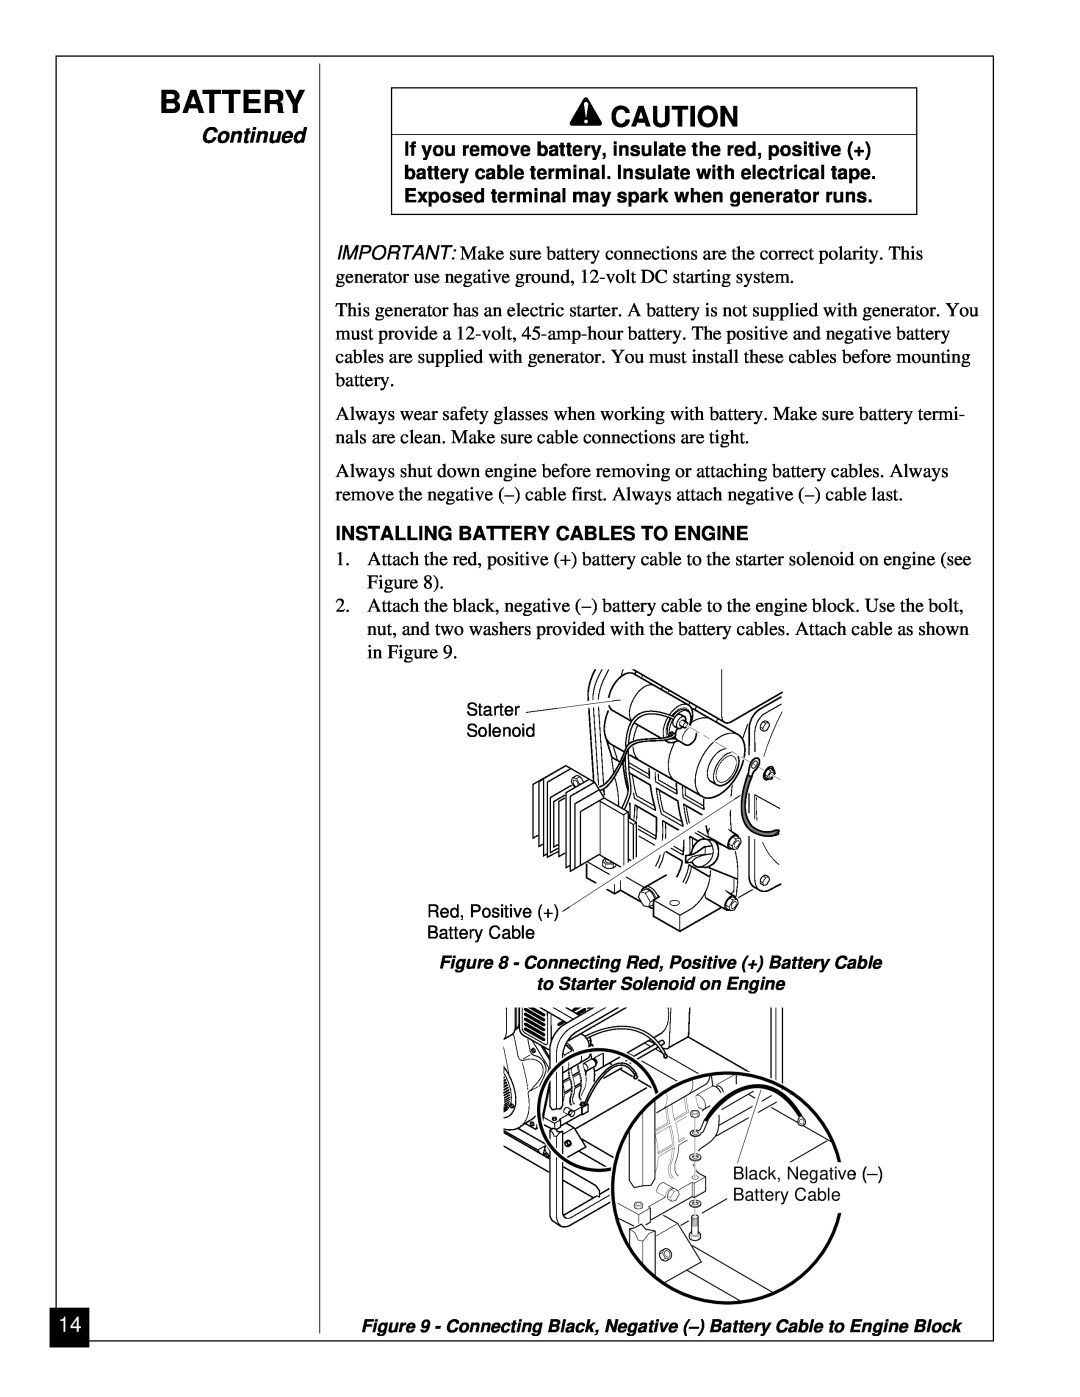 Master Lock MGY5000 installation manual Continued, Installing Battery Cables To Engine 